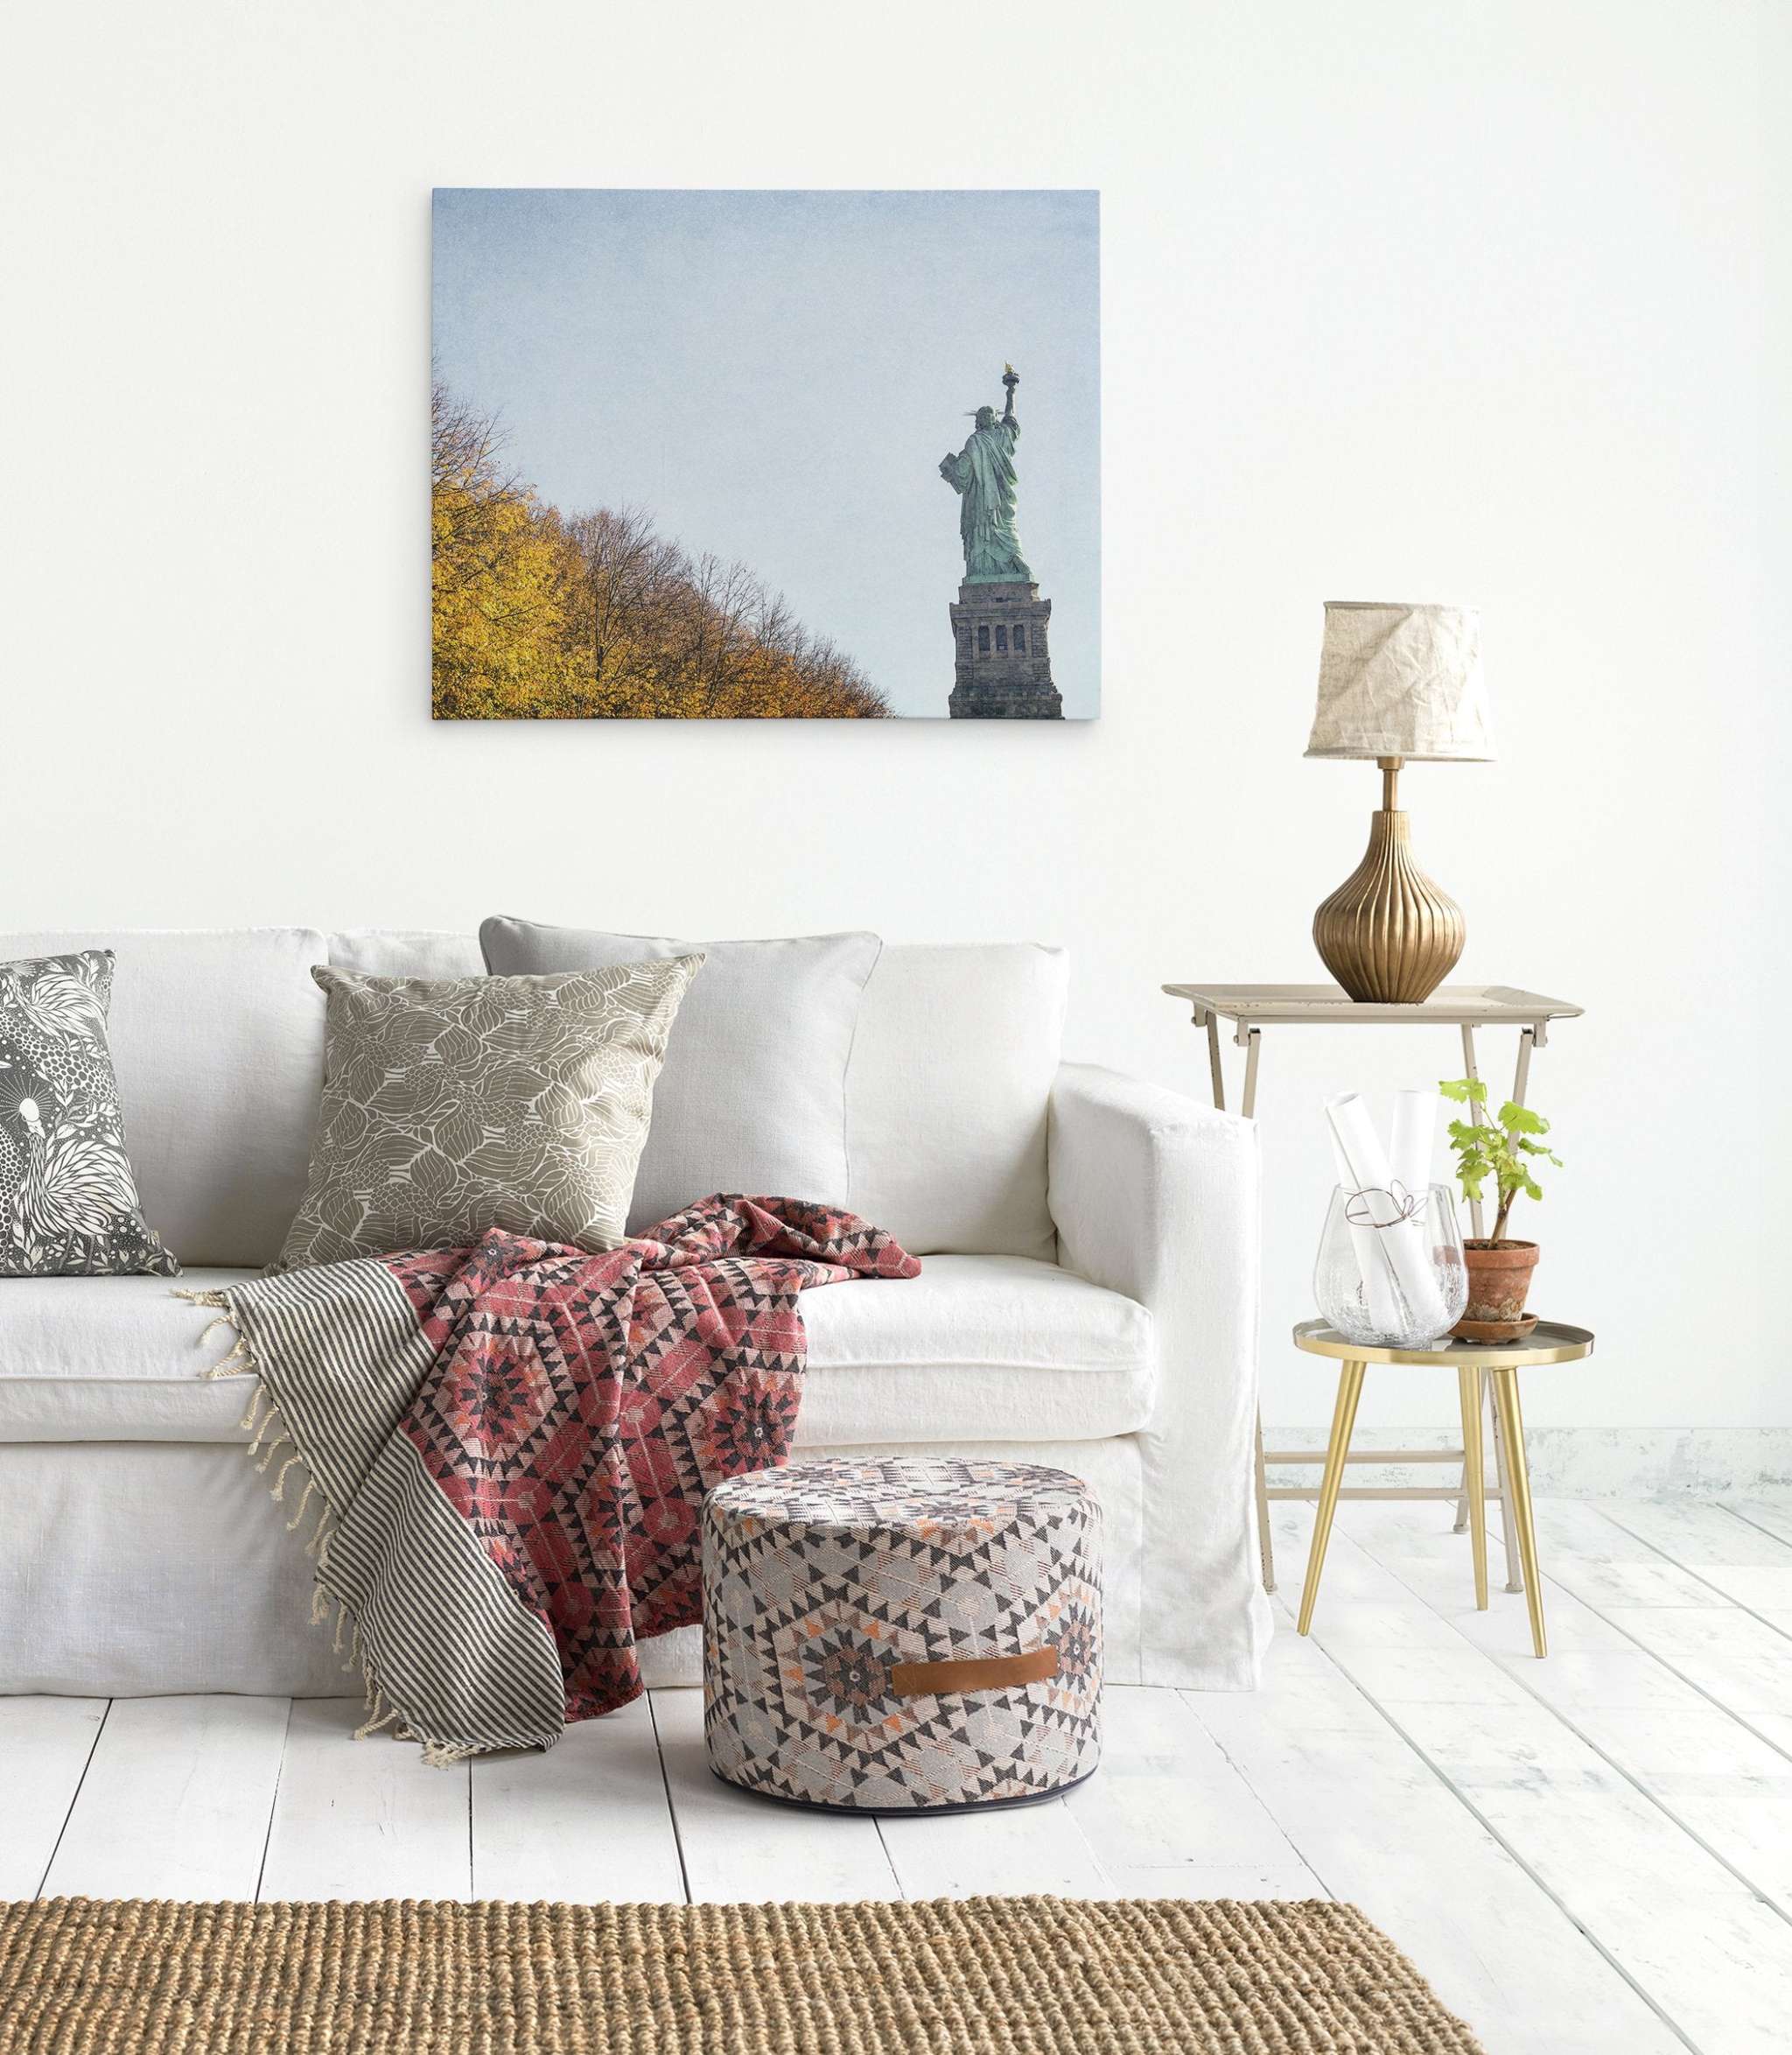 A bright living room features a white couch with patterned cushions and a colorful throw blanket, an ottoman, a side table with a lamp, and a small plant. A wall-mounted picture of the Statue of Liberty on premium artist-grade canvas is visible above the couch. The New York City Canvas Wall Art, 'Liberty in Fall' by Offley Green adds a stylish touch to the décor. Light wood flooring completes the setting.